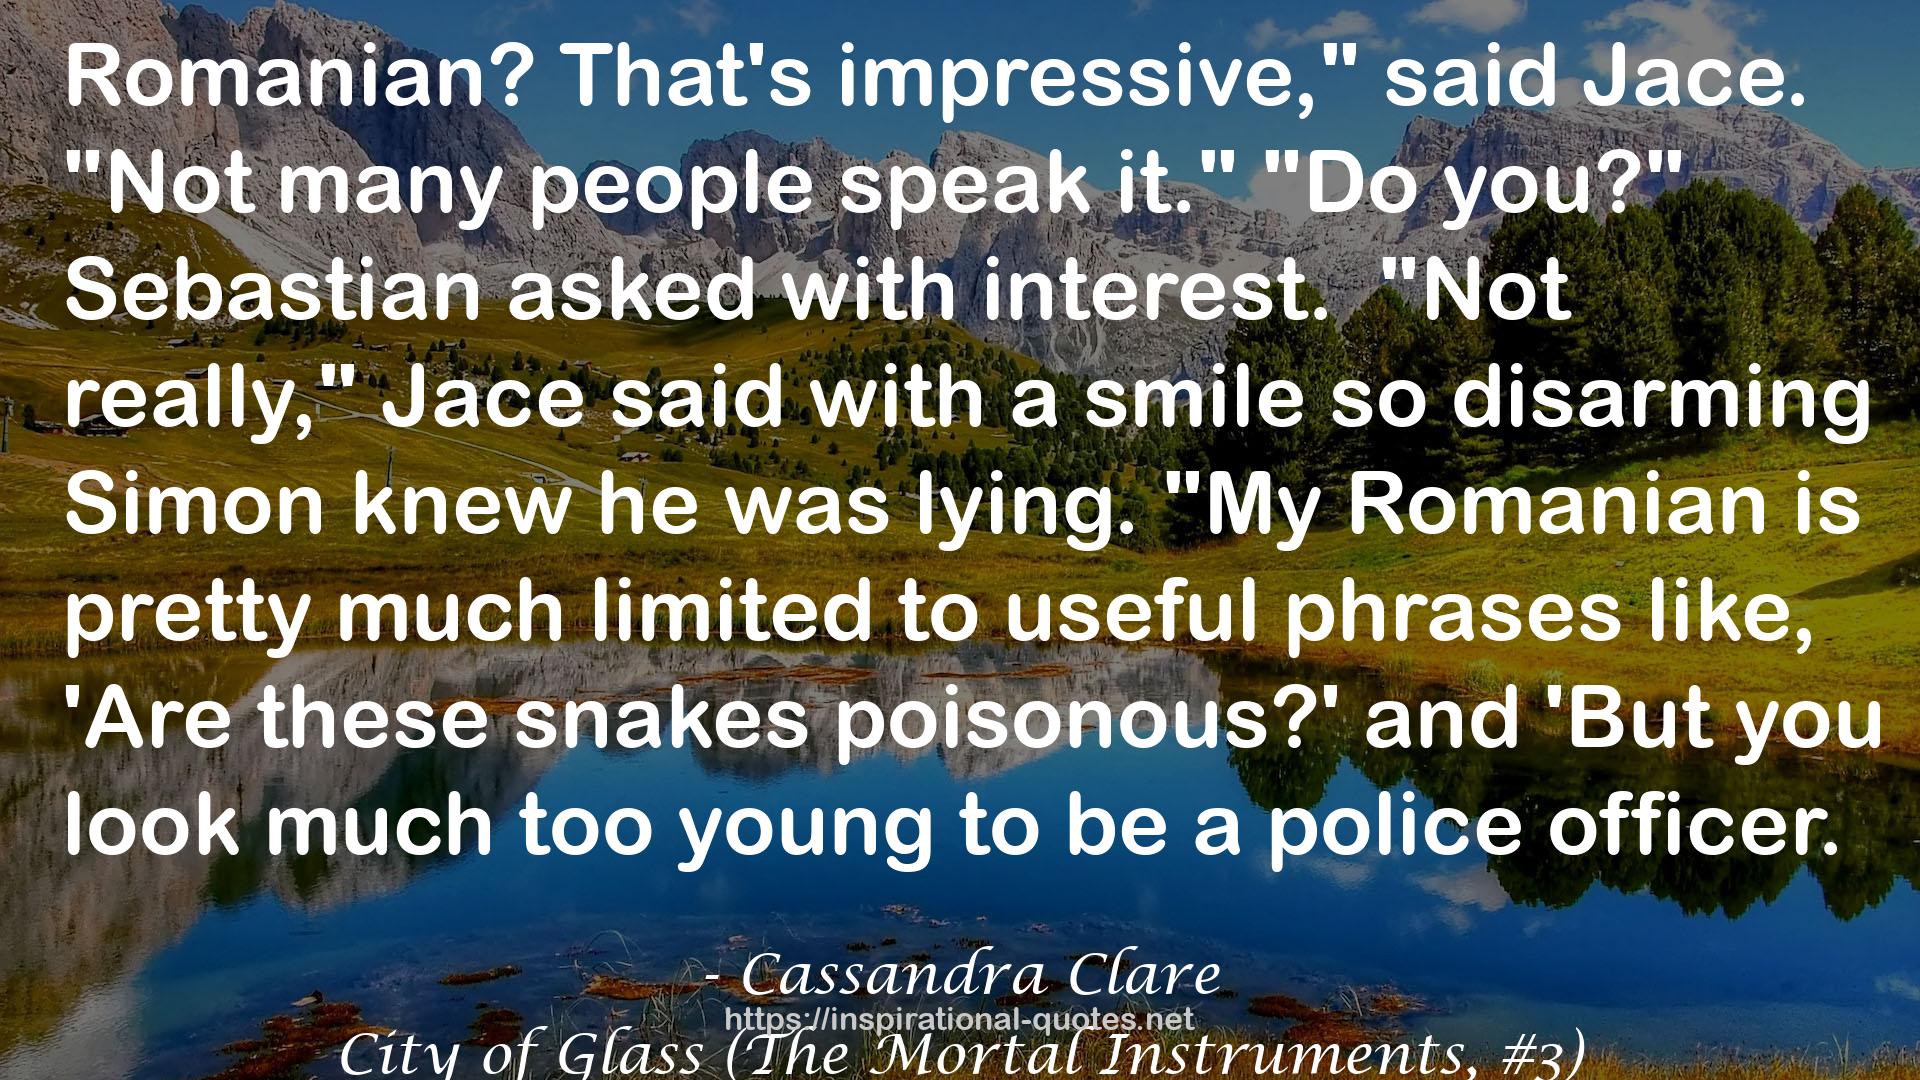 City of Glass (The Mortal Instruments, #3) QUOTES